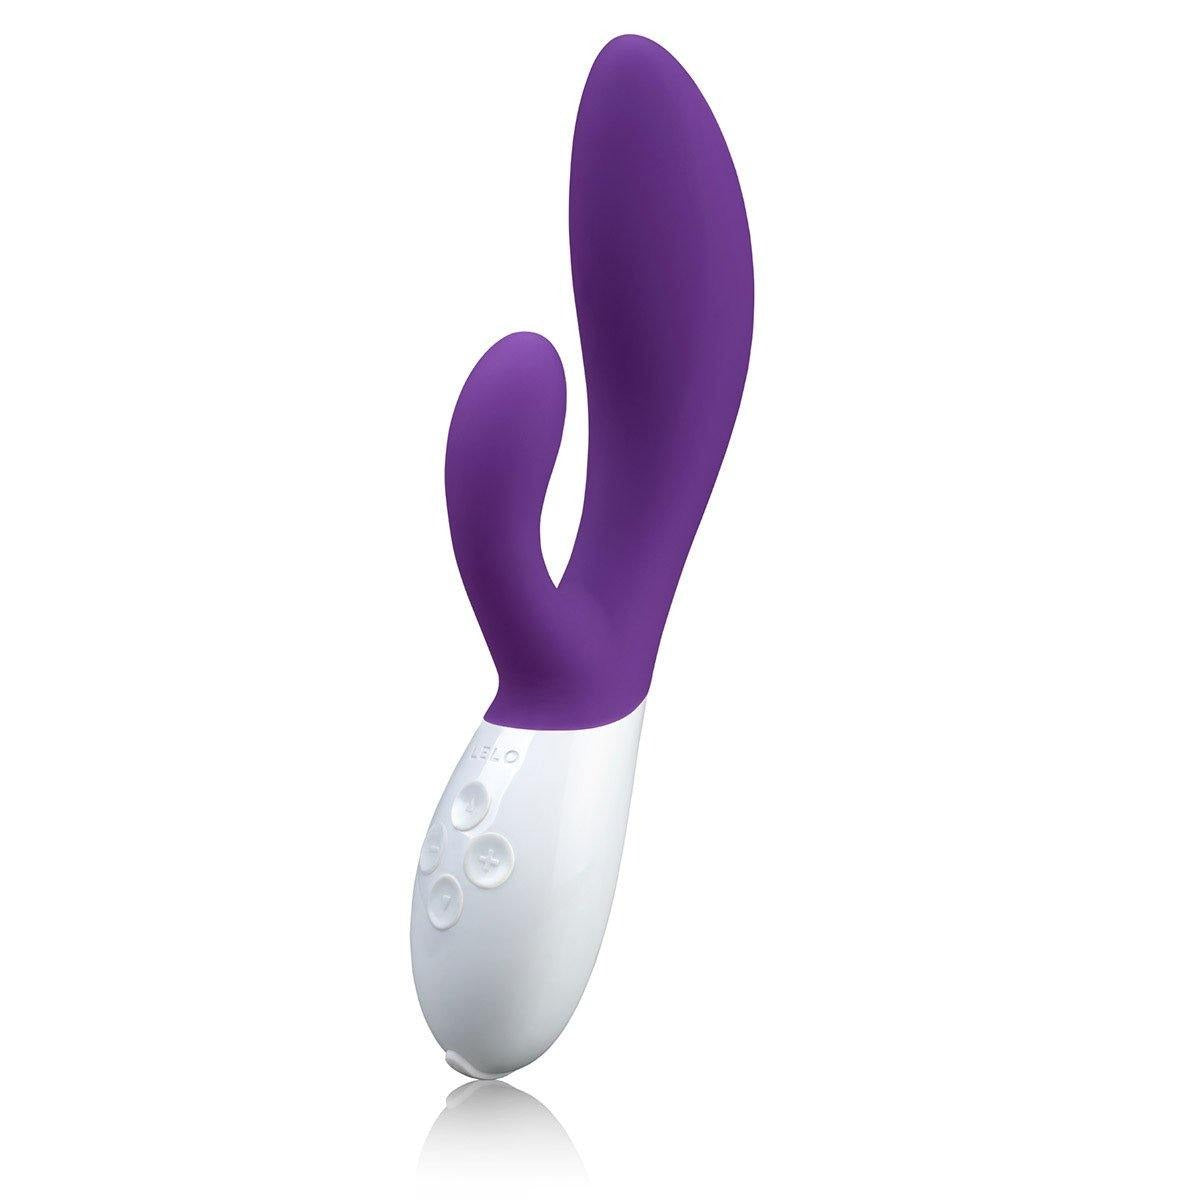 Lelo Ina 2 - Buy At Luxury Toy X - Free 3-Day Shipping